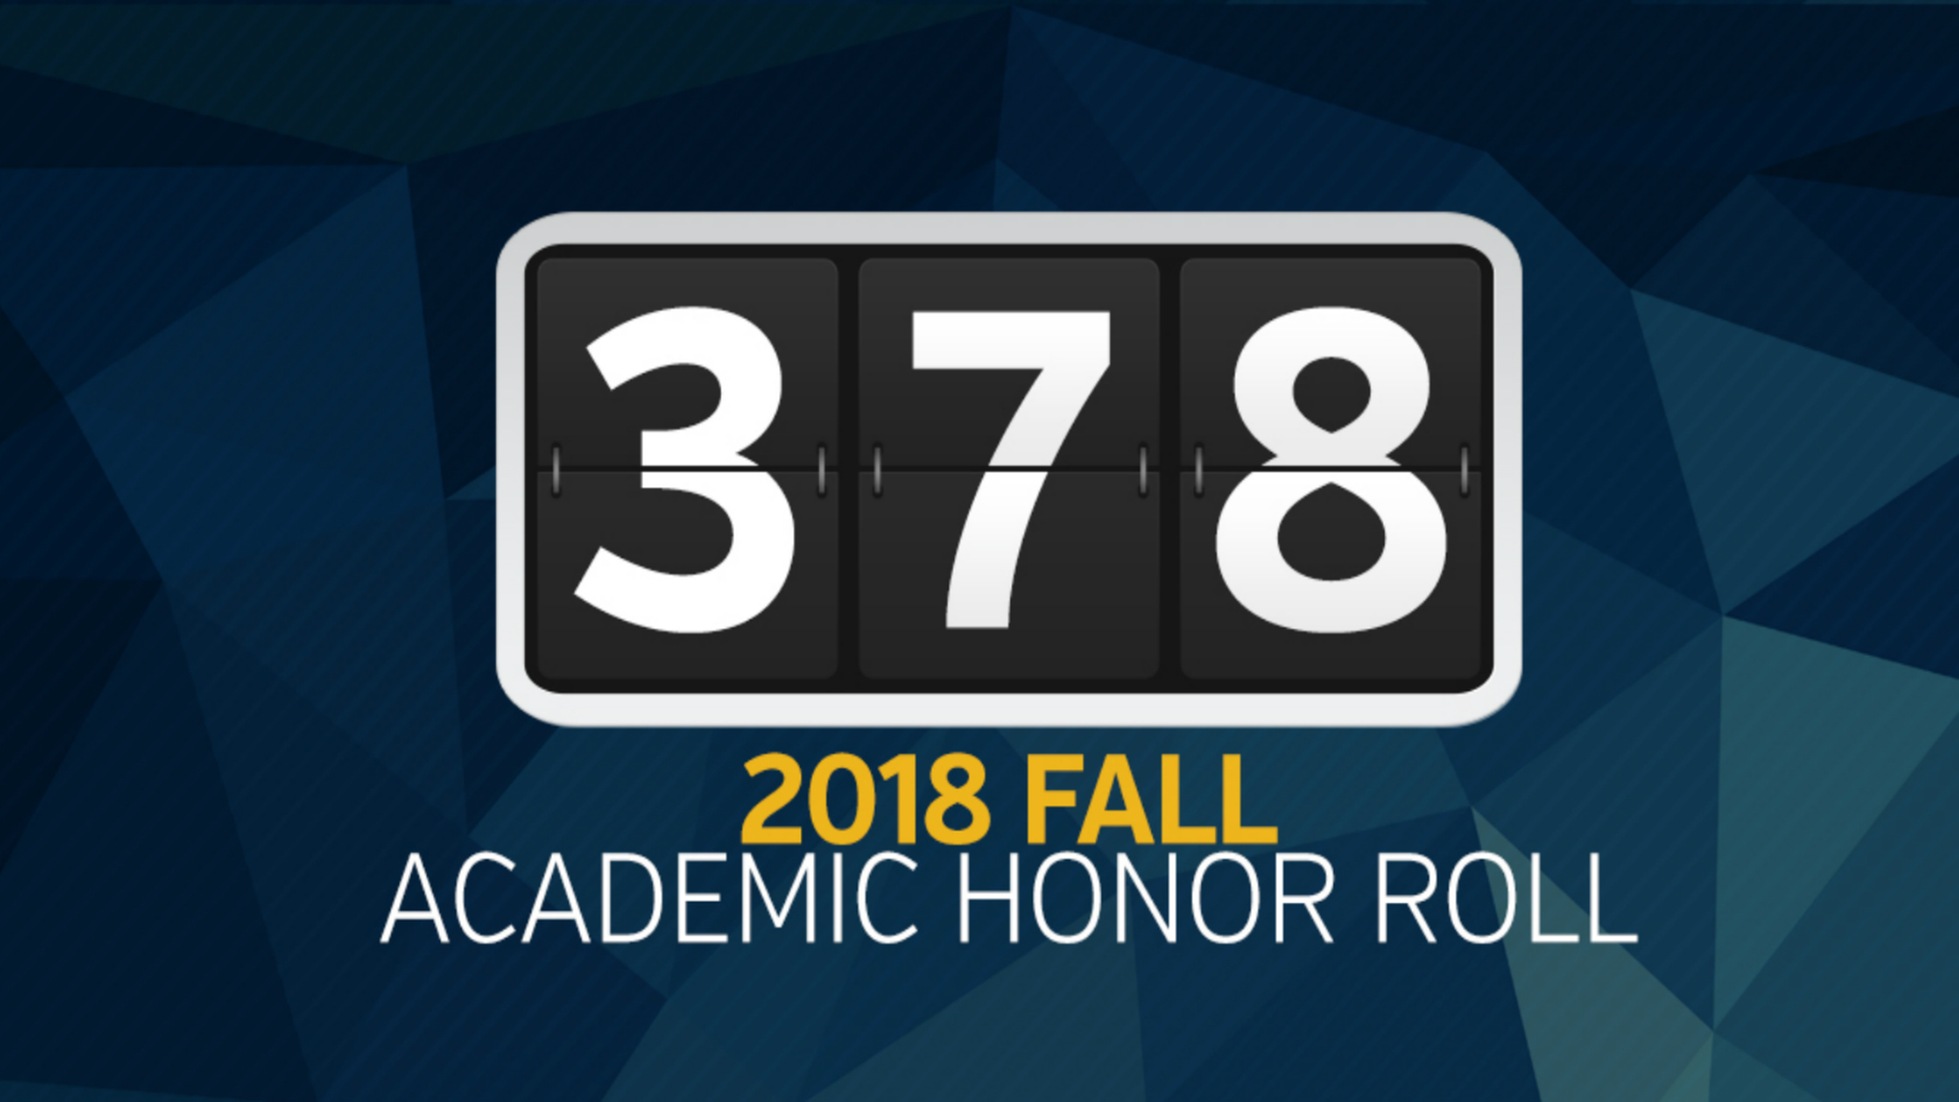 55 Crusaders Highlight Big Group on SCAC Fall Academic Honor Roll Selections